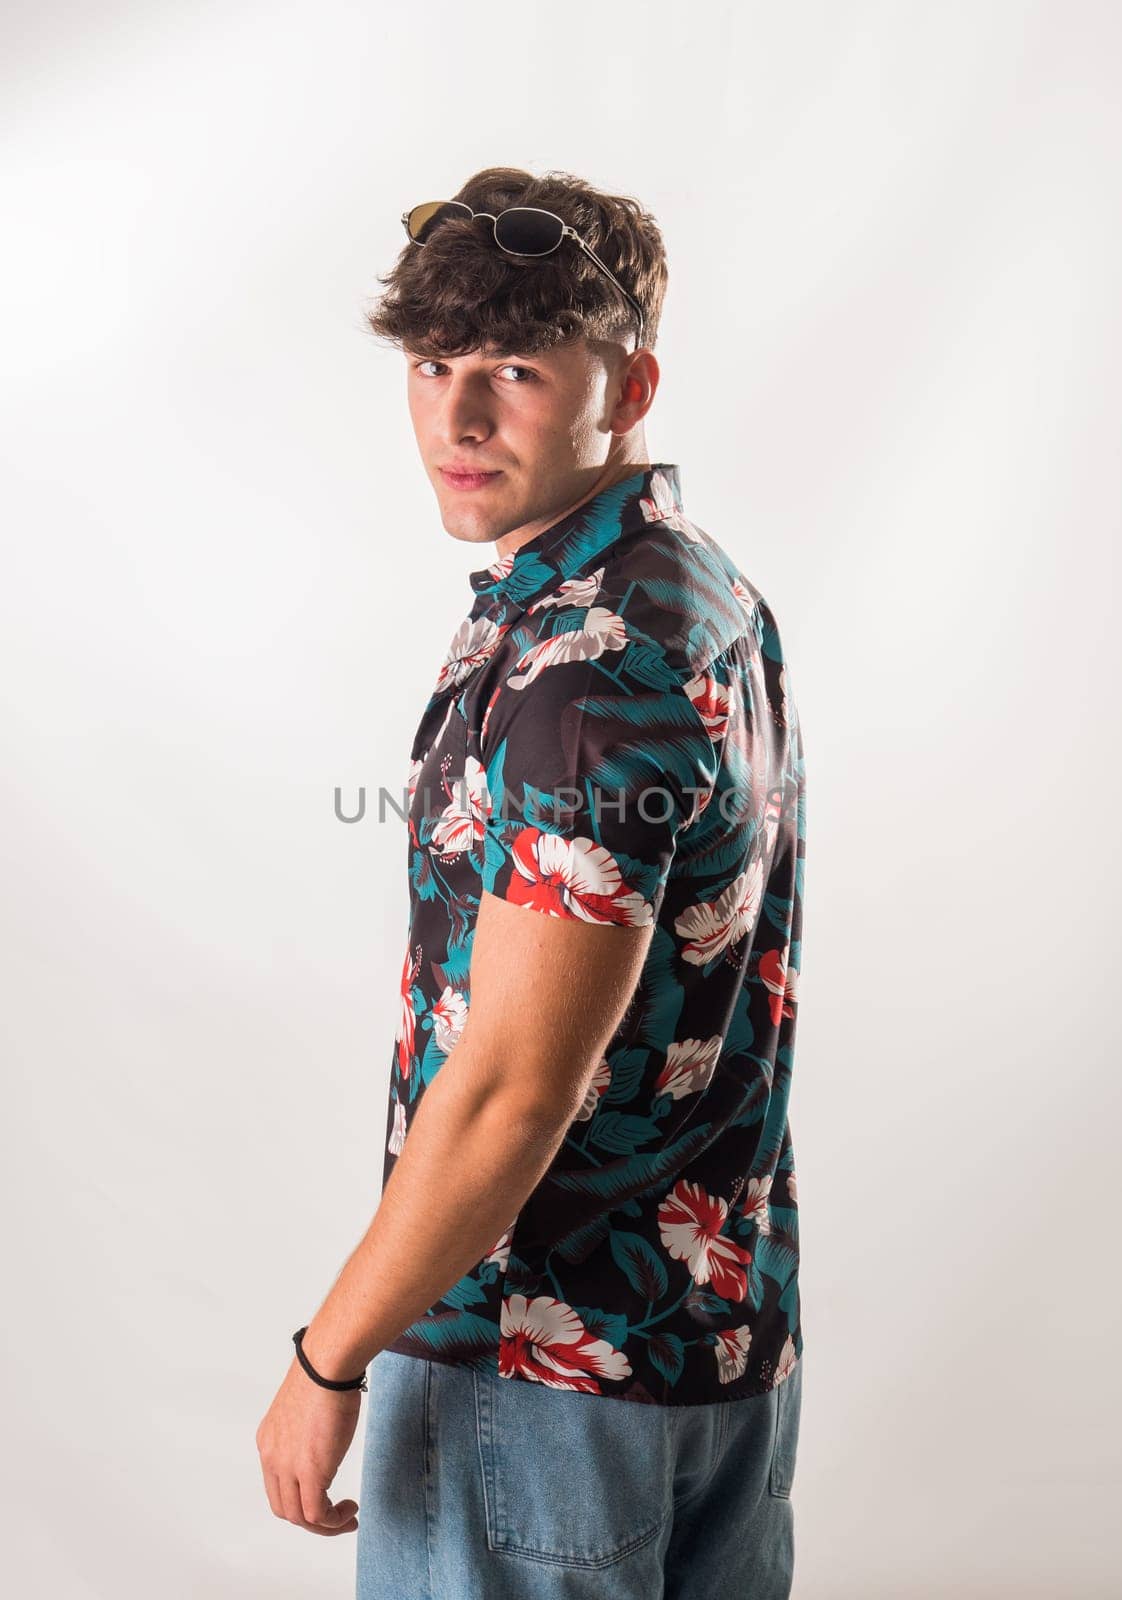 Attractive, muscular young man smiling, wearing open hawaian style shirt by artofphoto